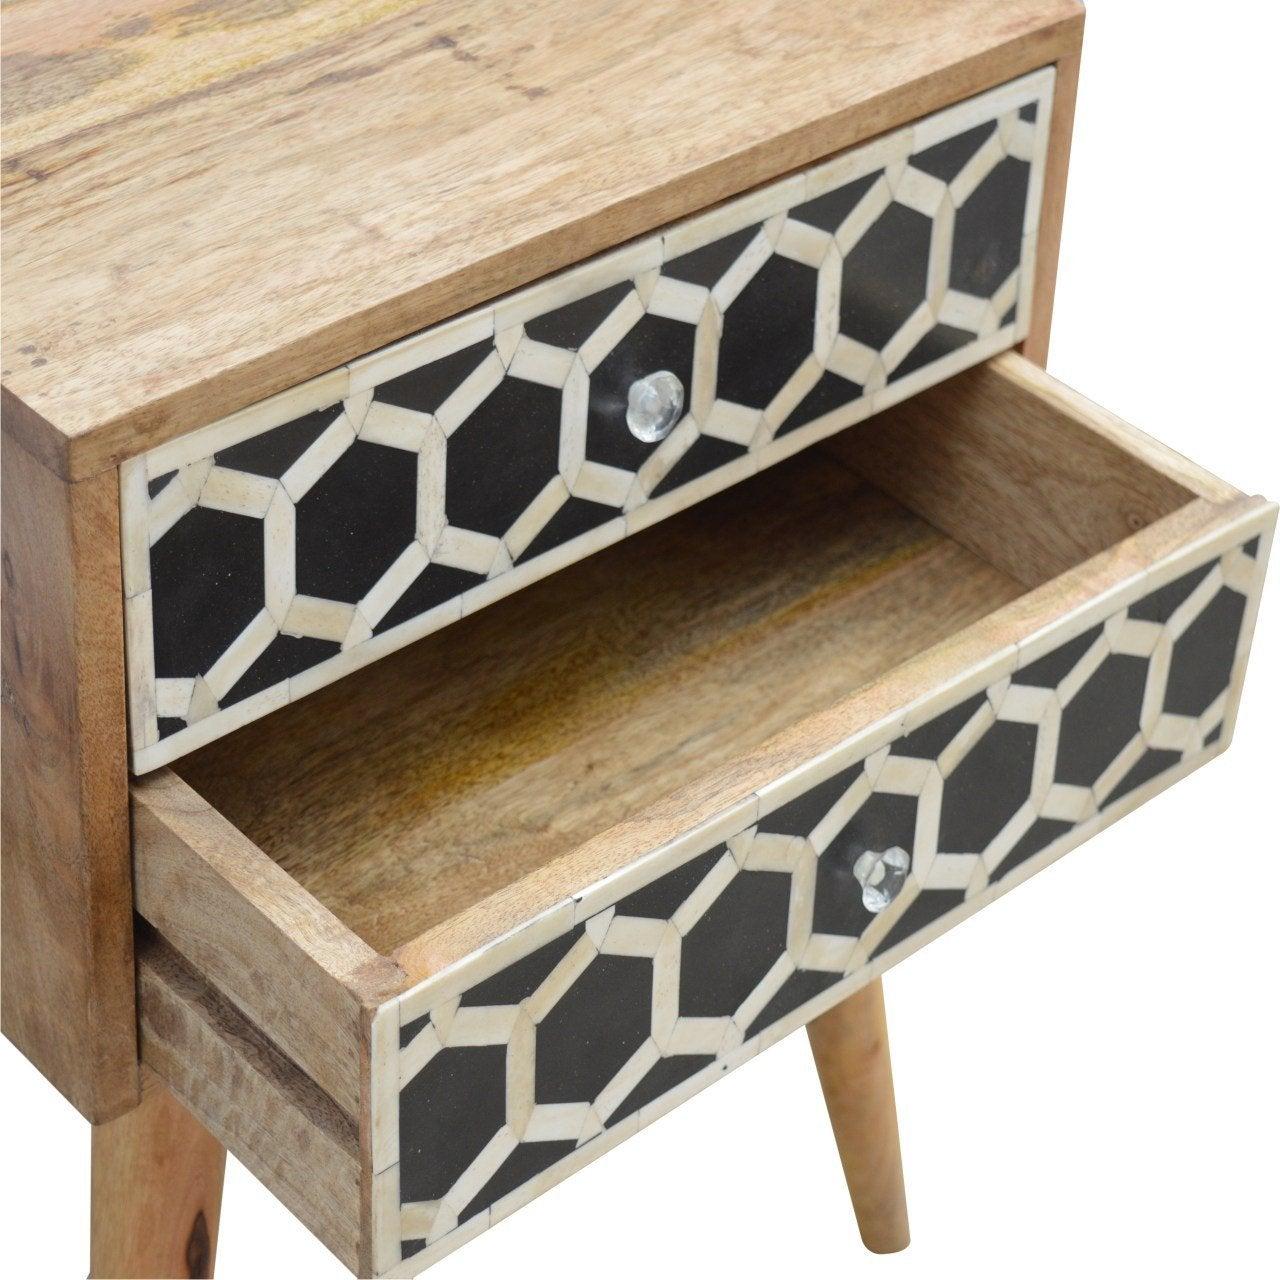 Bone inlay bedside table with 2 drawers - crimblefest furniture - image 6